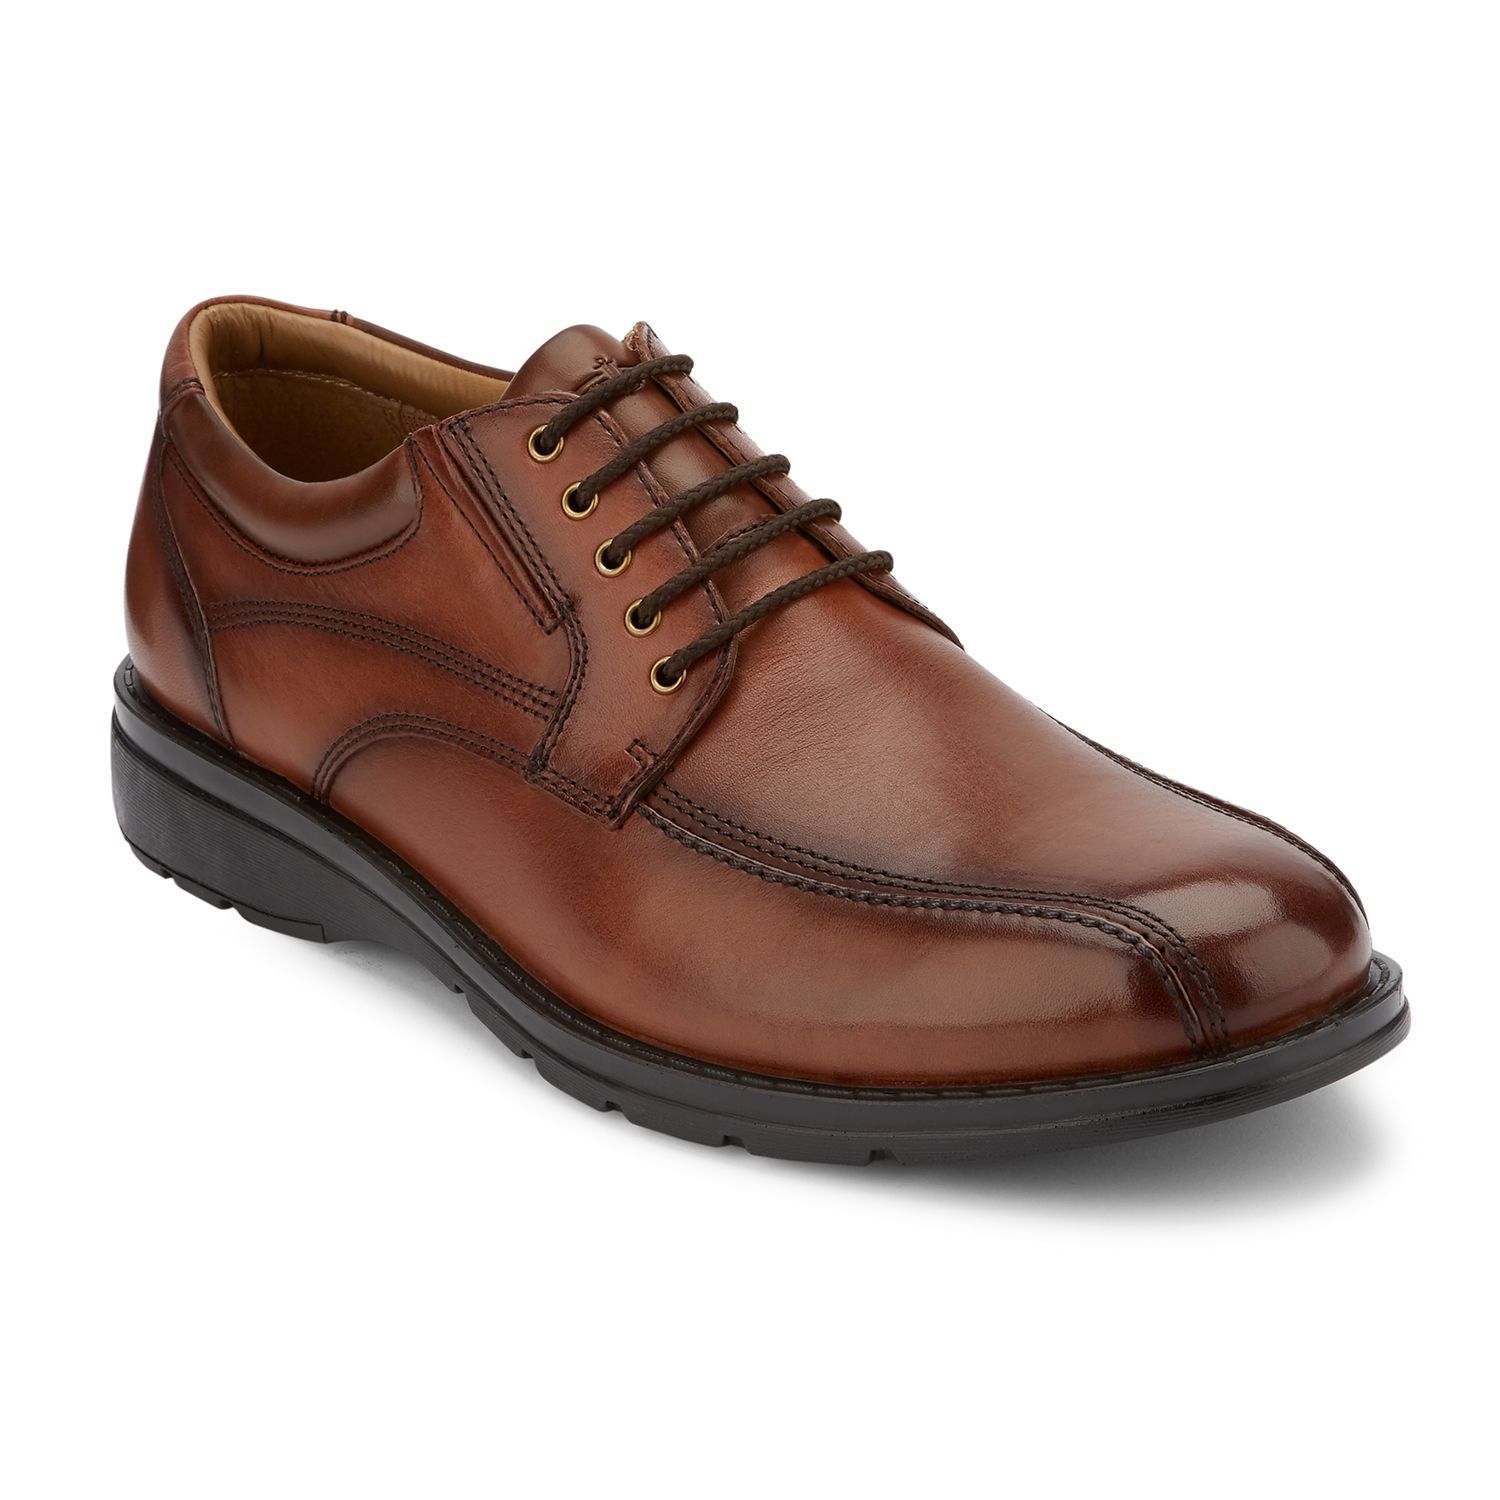 dockers trustee oxford shoes